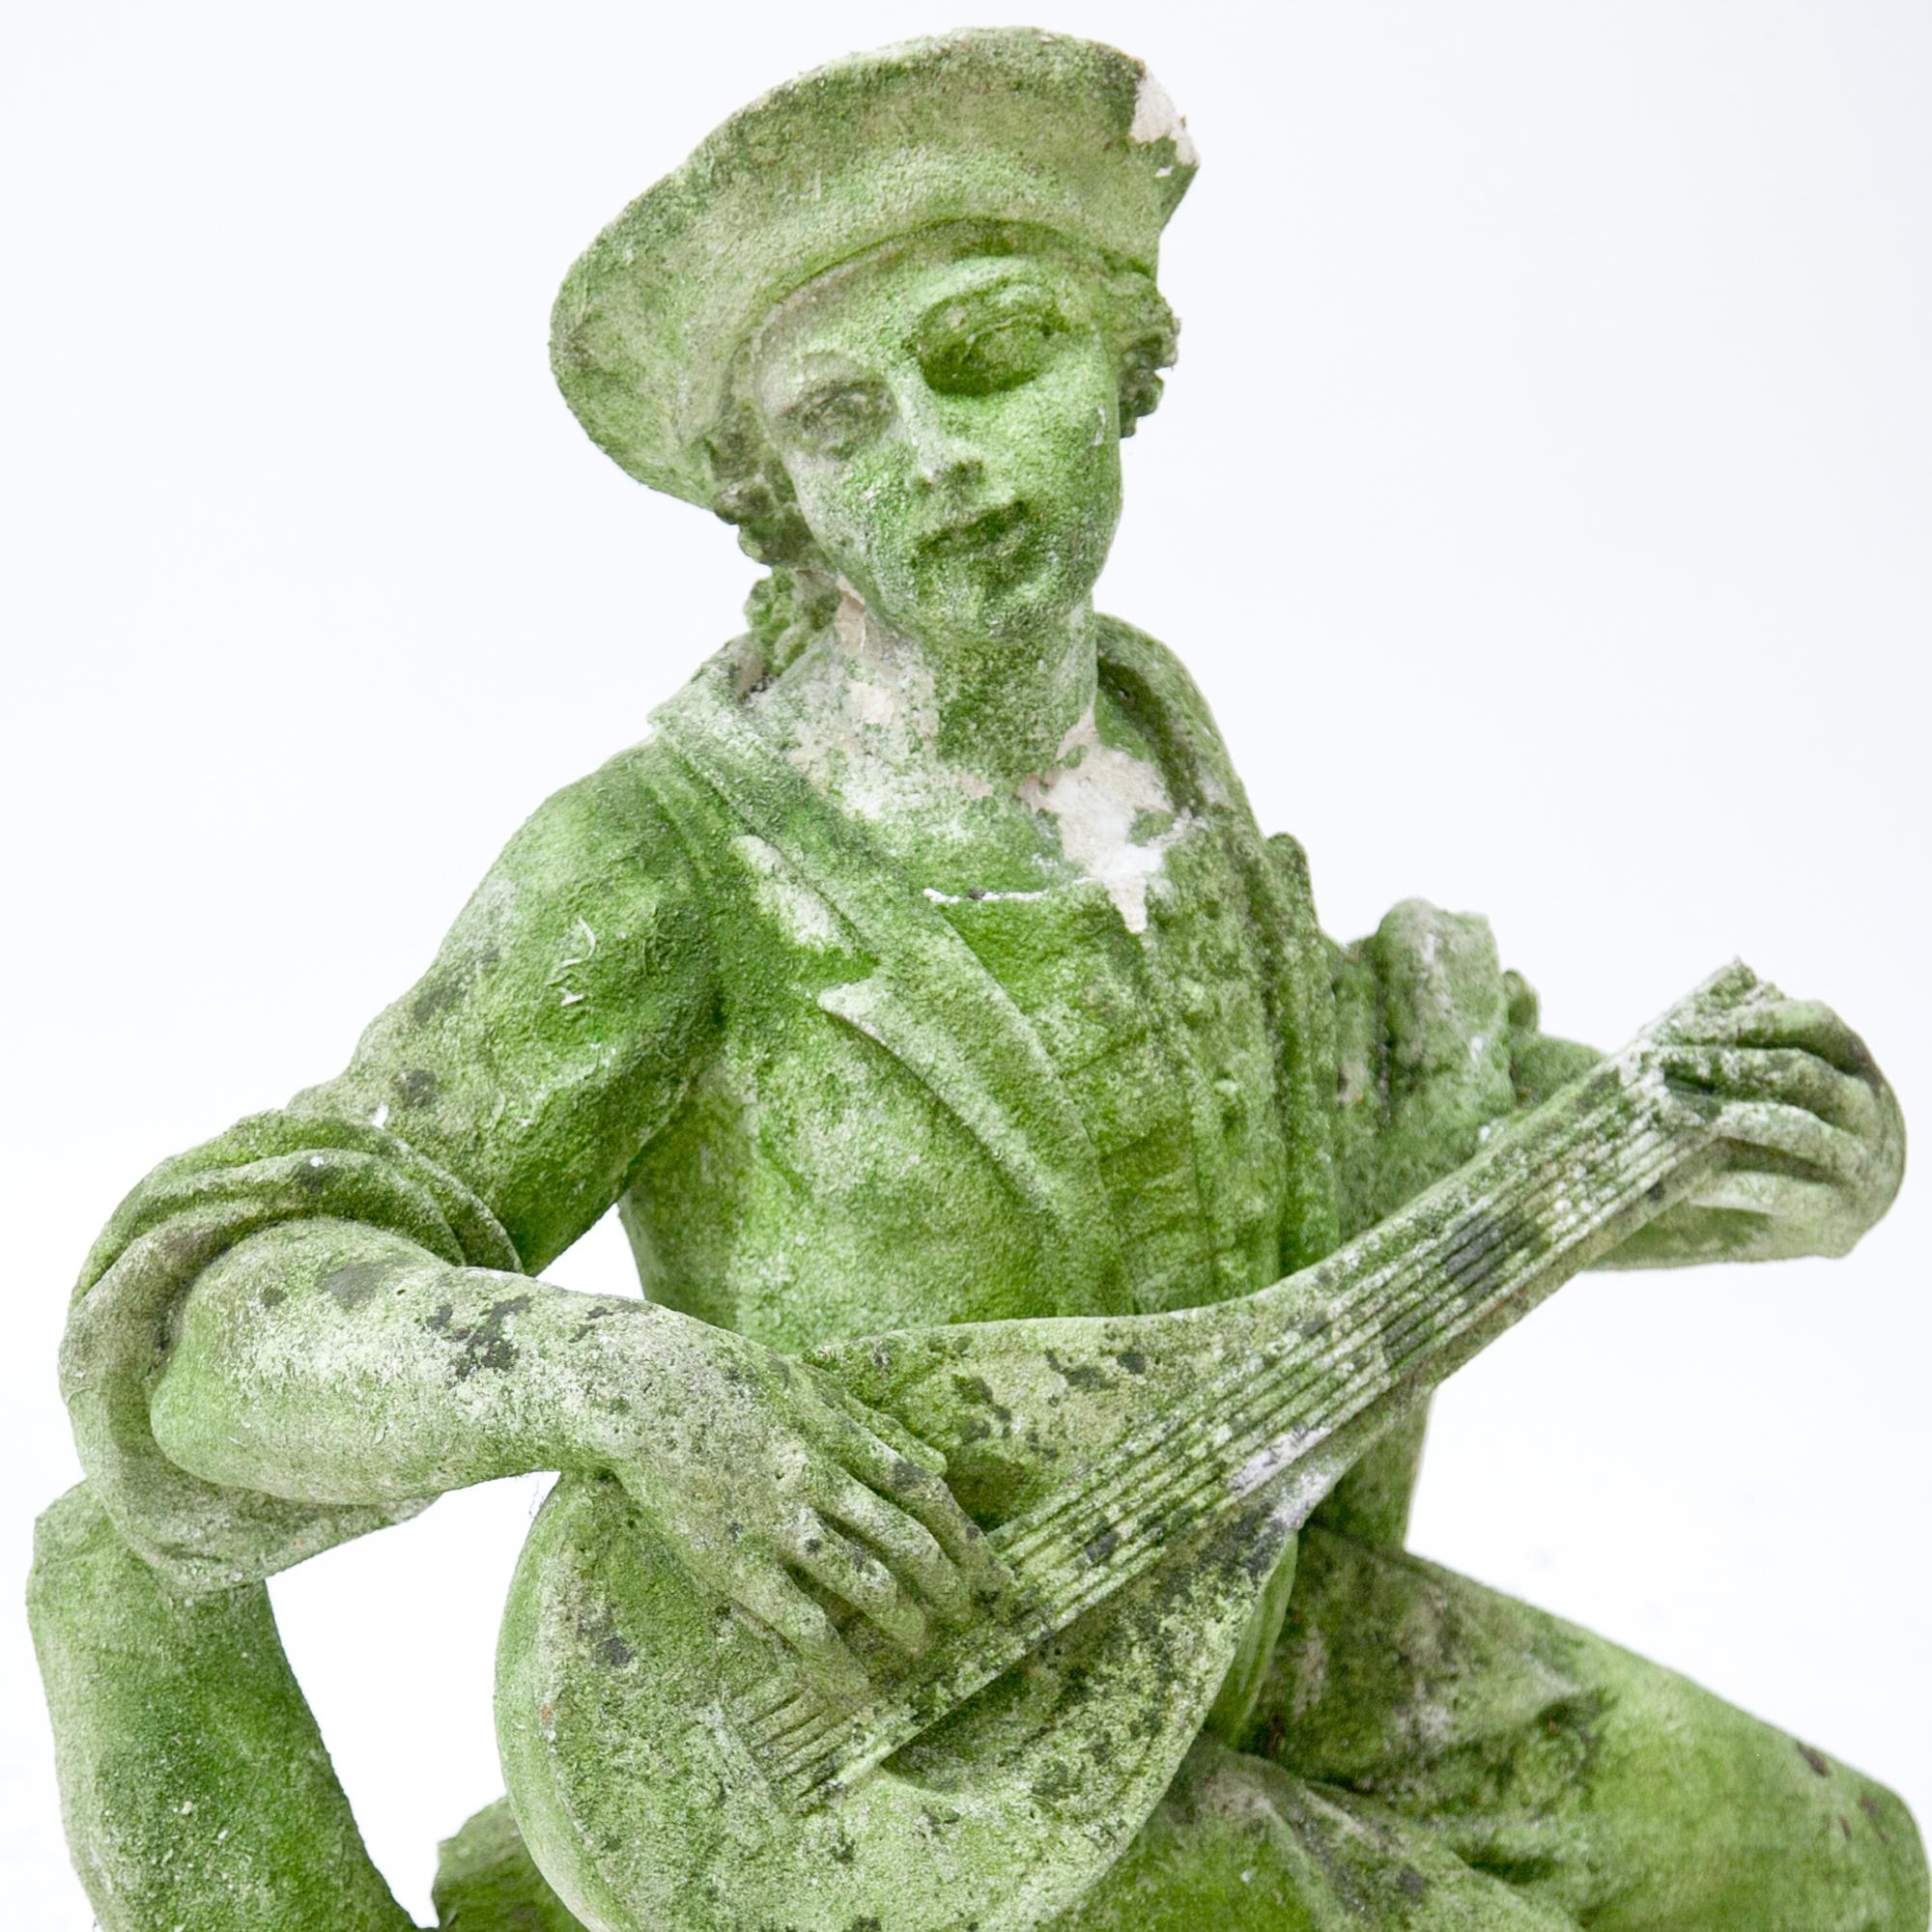 Italian Pastoral sculpture in carved Pietra di Vicenza stone of a seated lute player with a dog at his feet. Very detailed carving, partly damaged and weathered. Provenance: England.